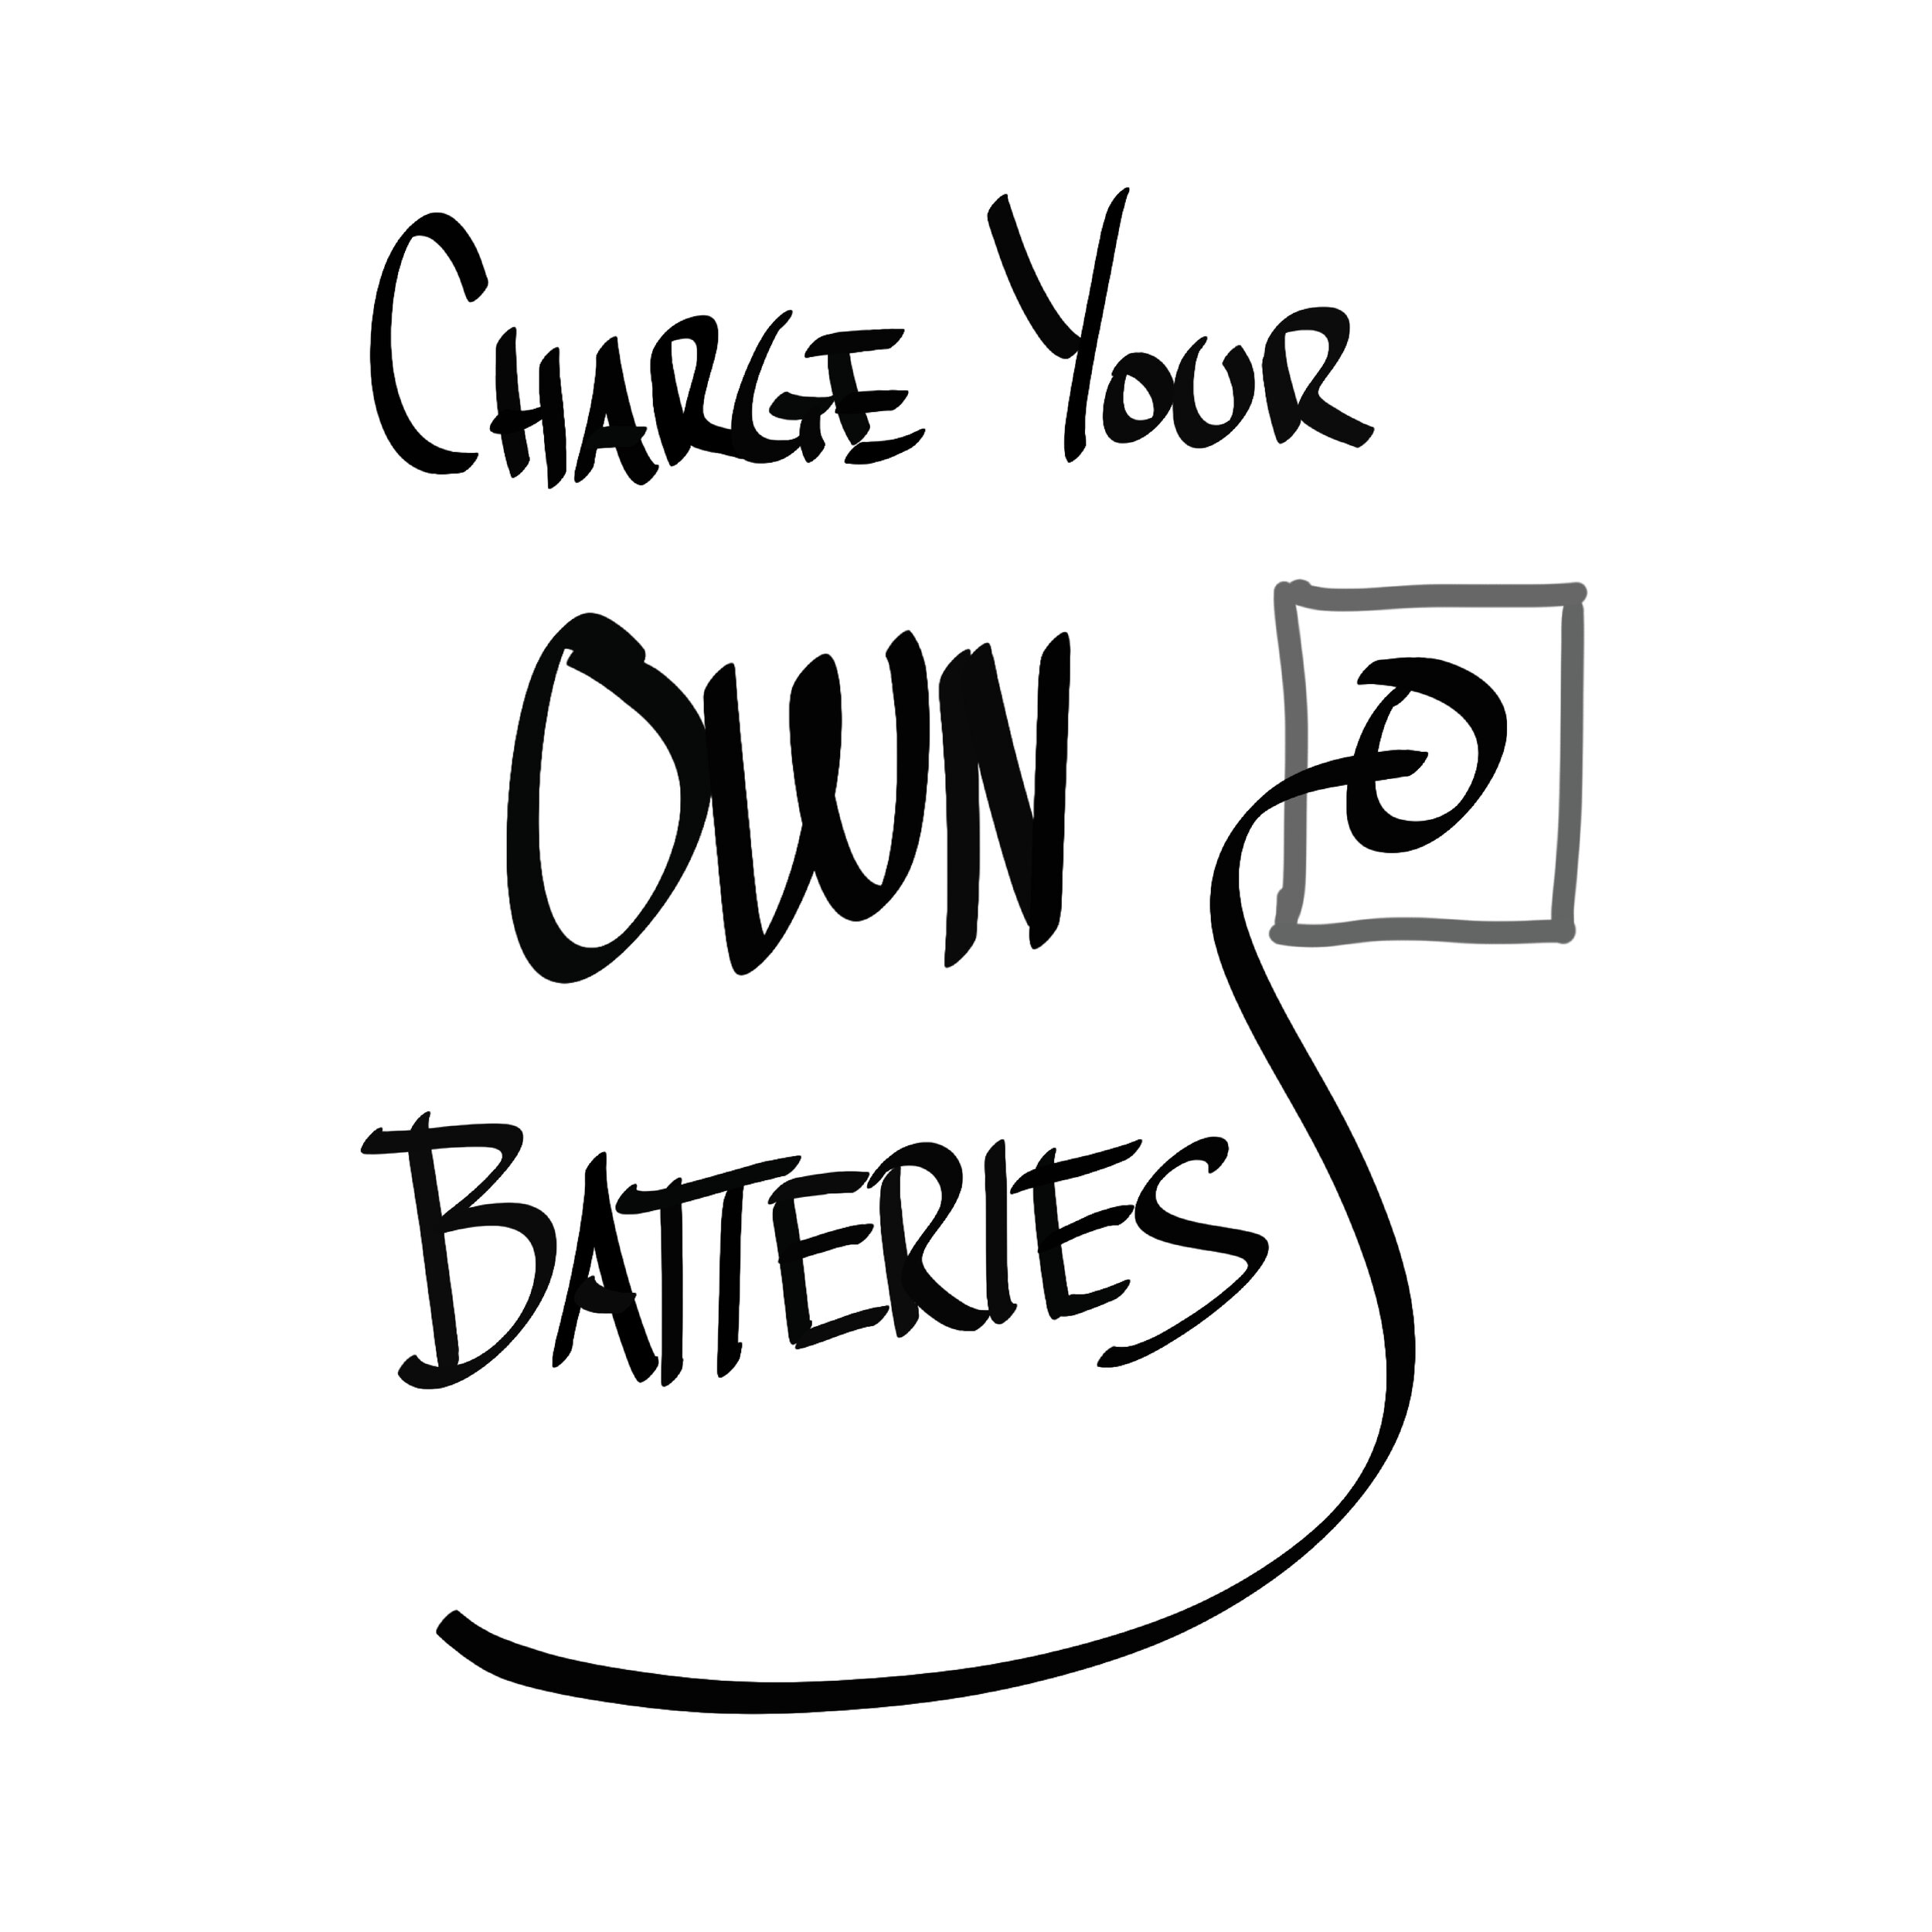 Charge your own batteries (1).jpg